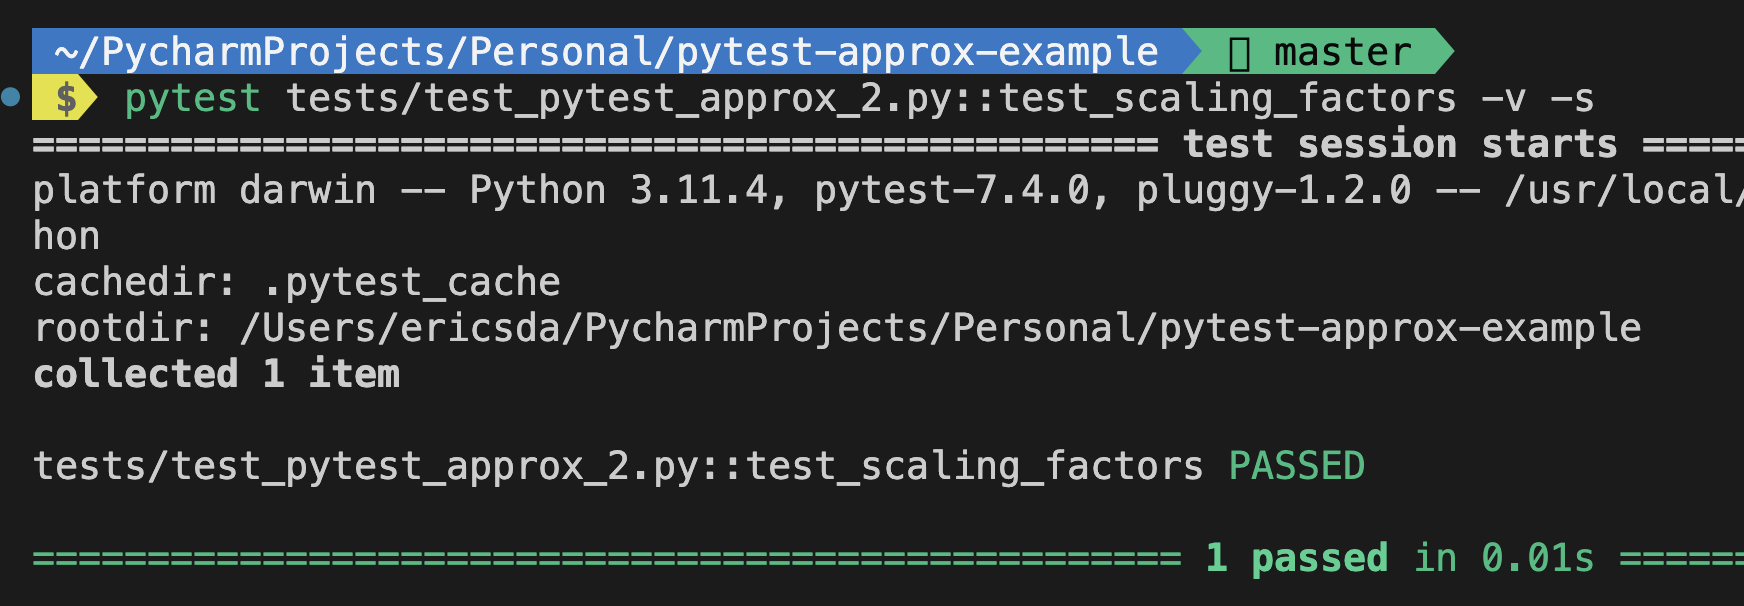 pytest-approx-scaling-factors